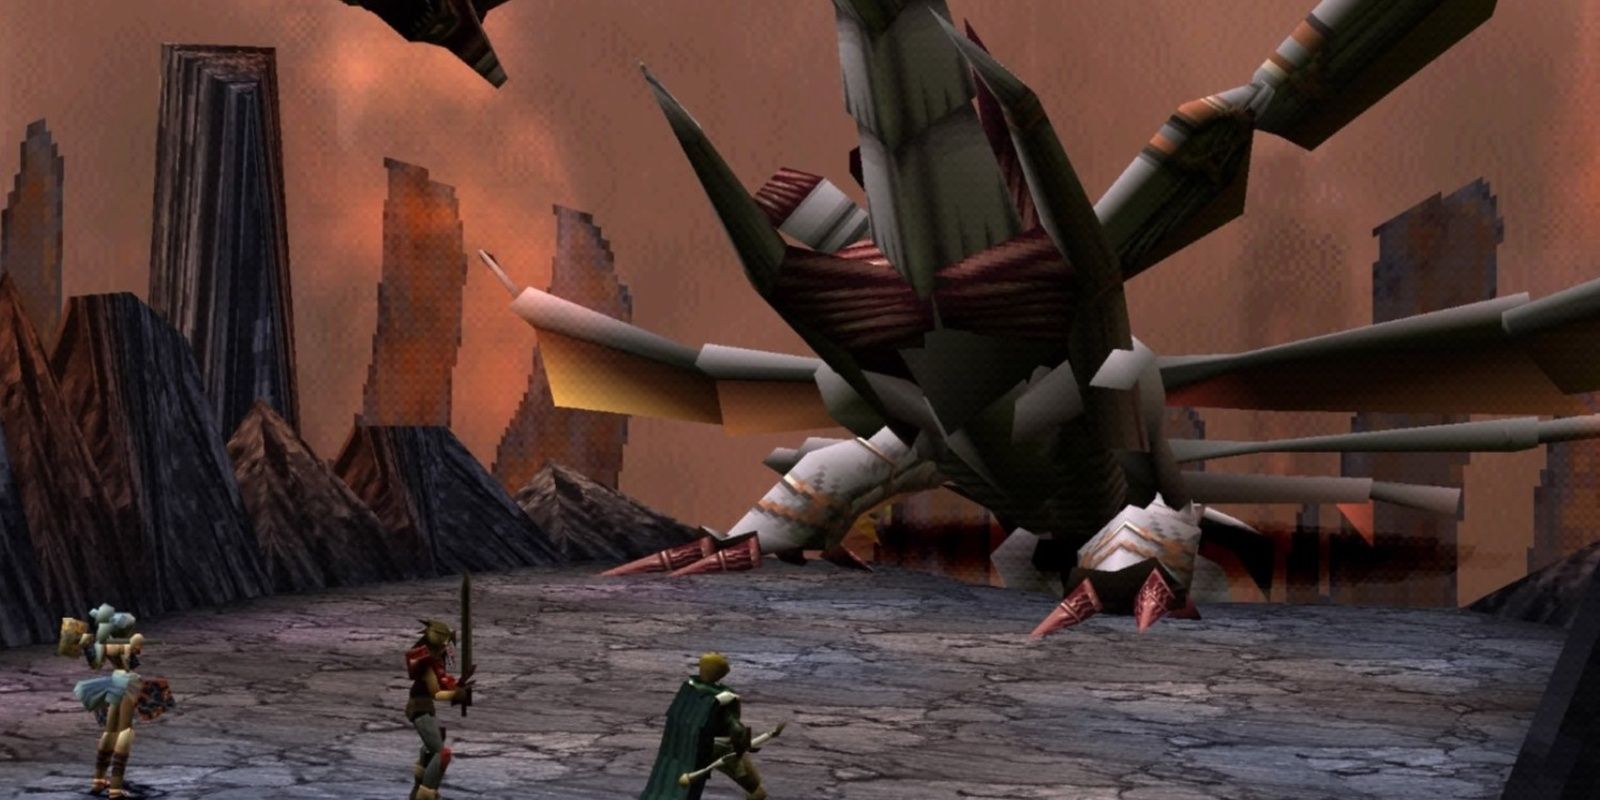 the party fighting a giant dragoon